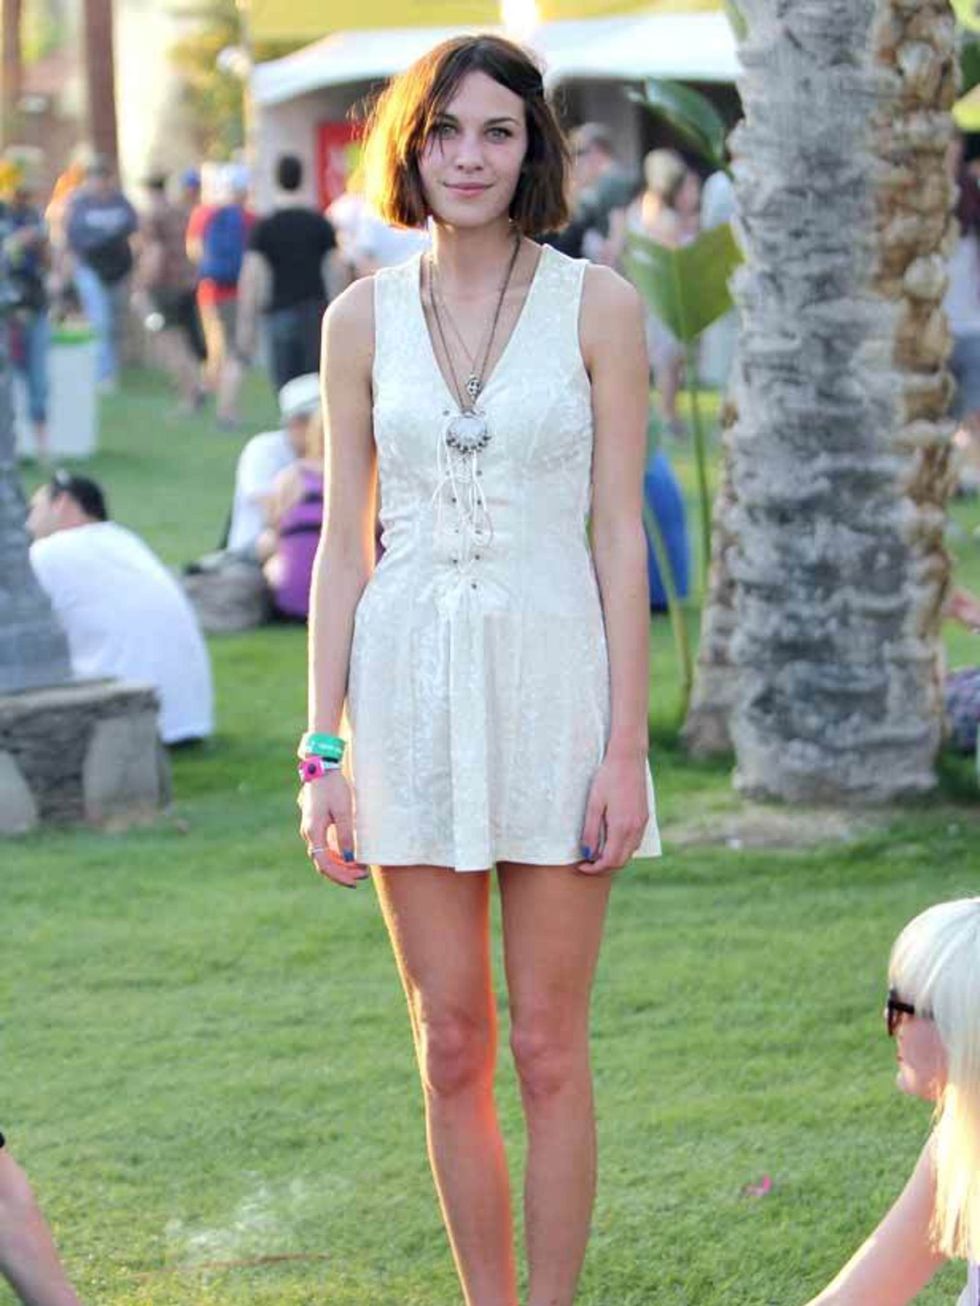 <p><a href="http://www.elleuk.com/starstyle/style-files/(section)/alexa-chung">Alexa Chung</a> wearing a lace dress at the <a href="http://www.elleuk.com/starstyle/celebrity-trends/(section)/coachella-2011">Coachella</a> festival, 2011</p>